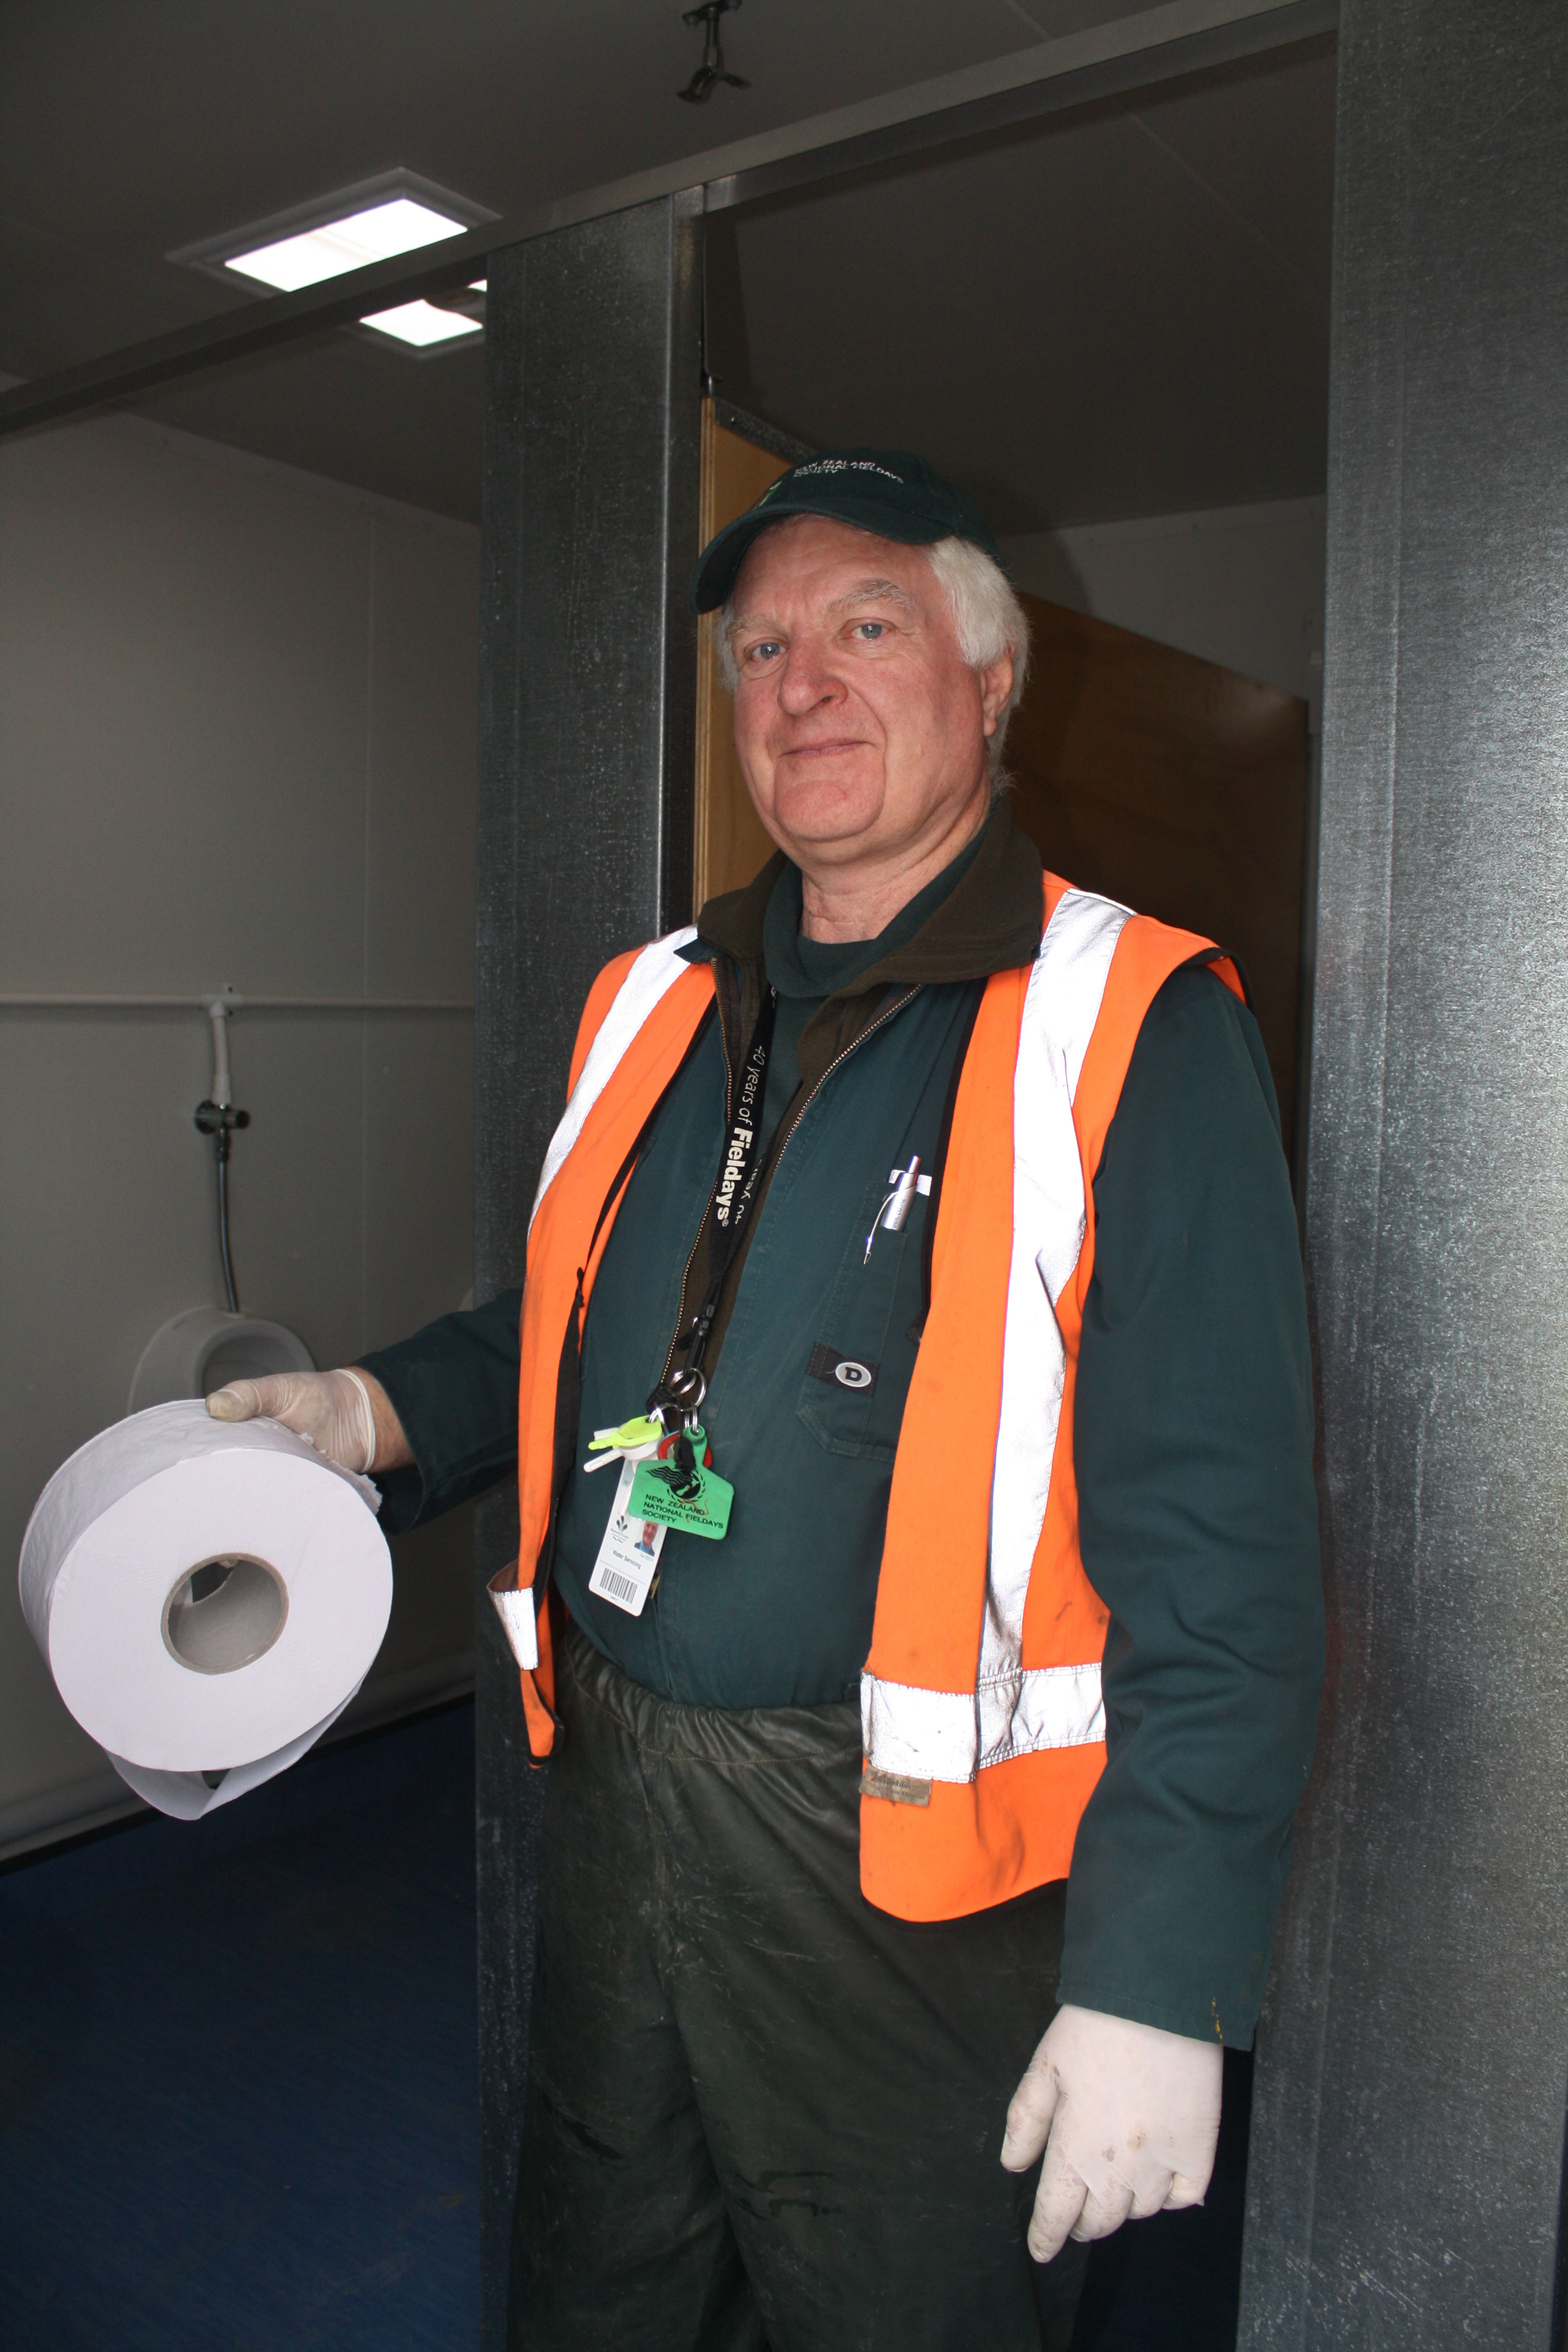 PHOTO: Alan Sharp on site at the Fieldays. Photo by Anita Pearson